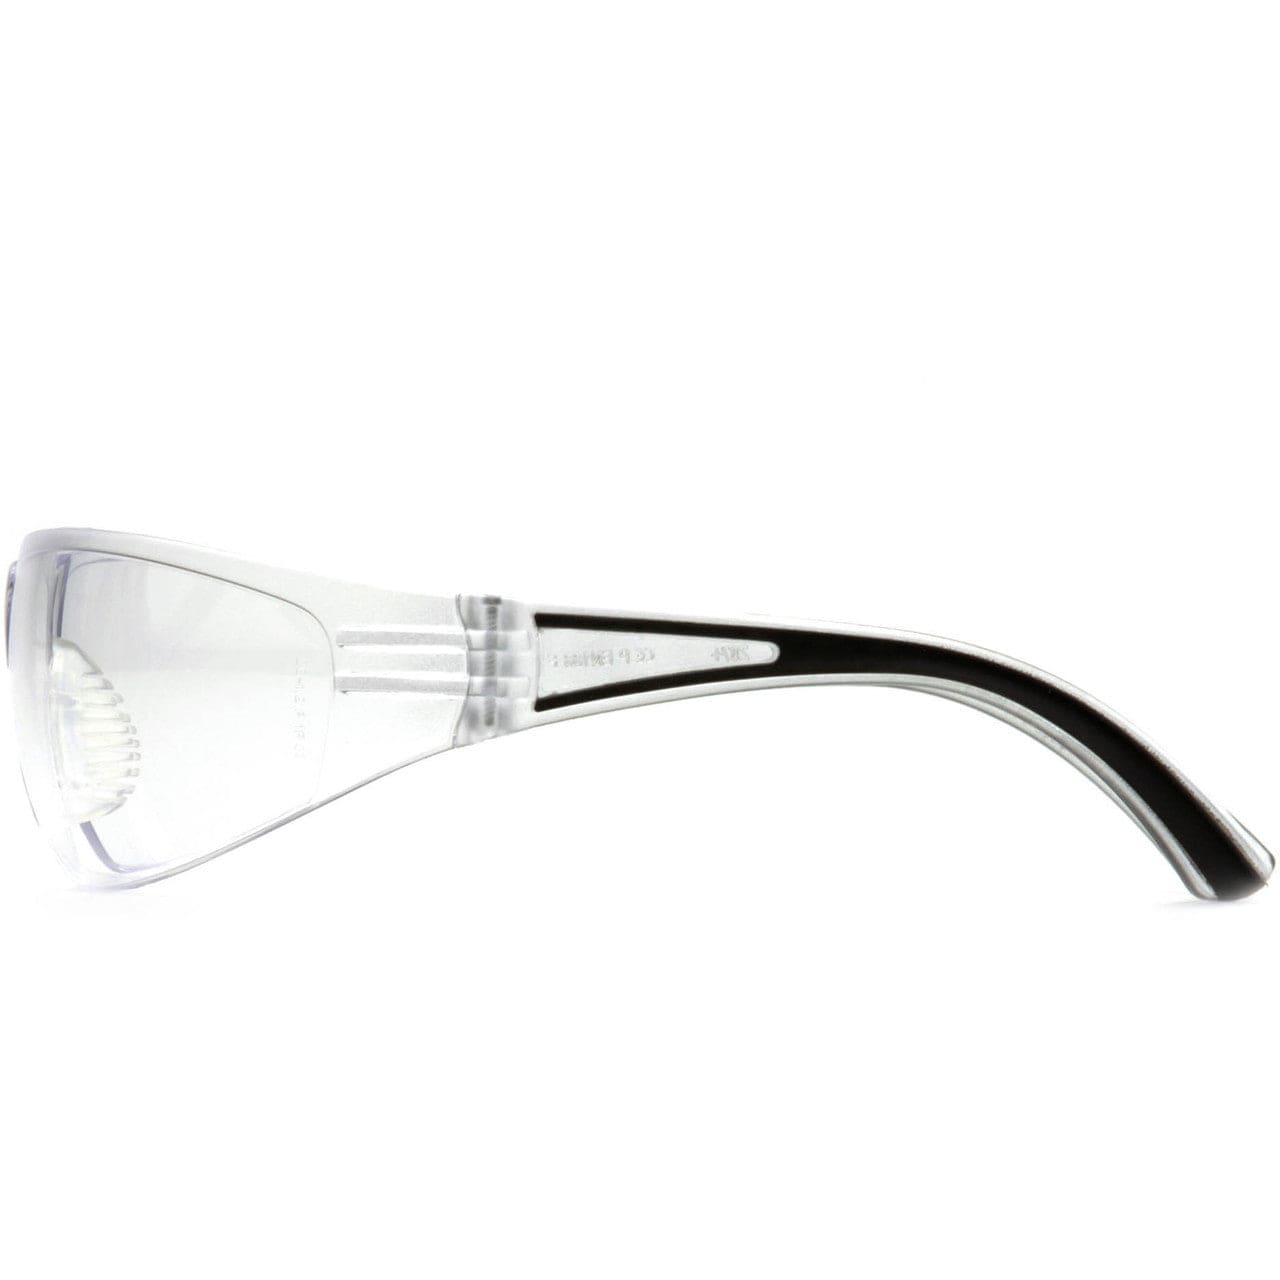 Pyramex Cortez Safety Glasses Black Temples Clear Lens SB3610S Side